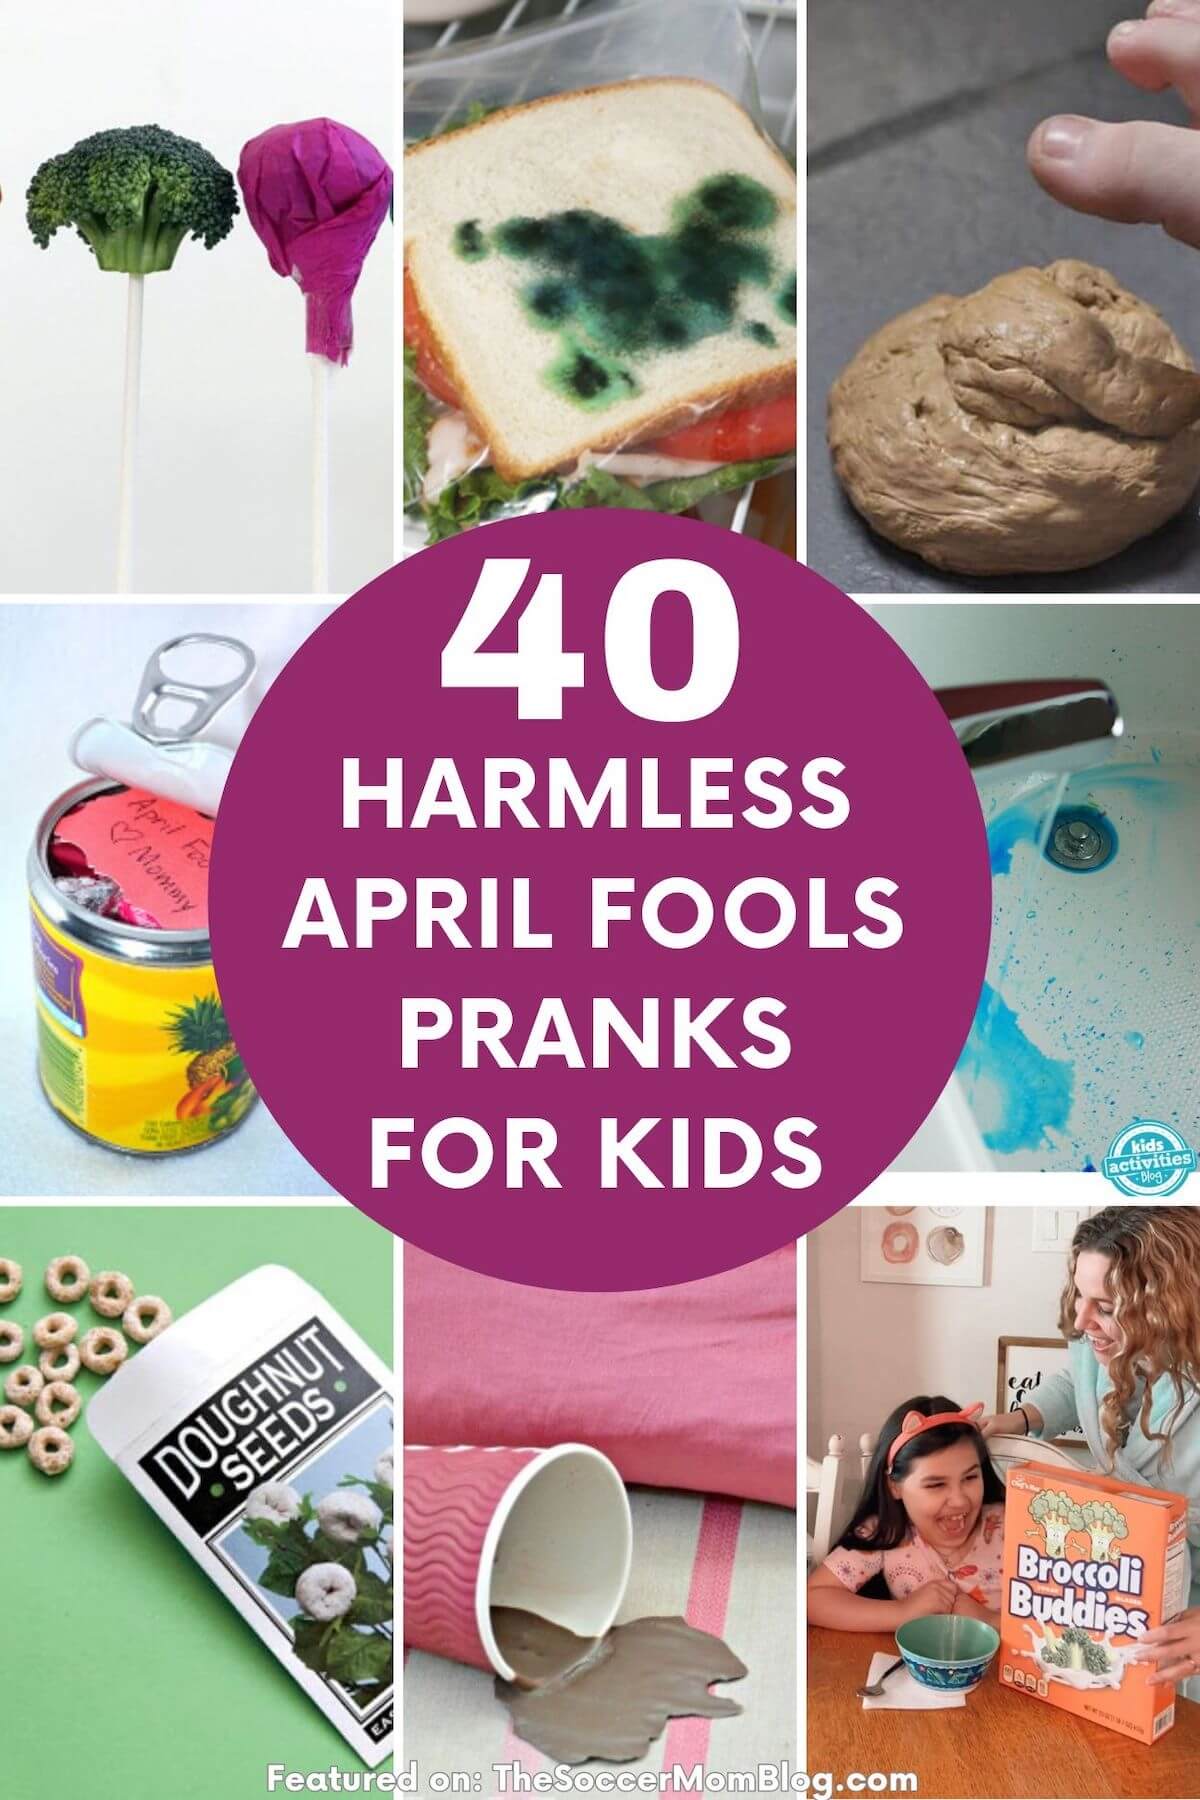 collage of funny prank photos, text overlay "40 harmless April fools pranks for kids".